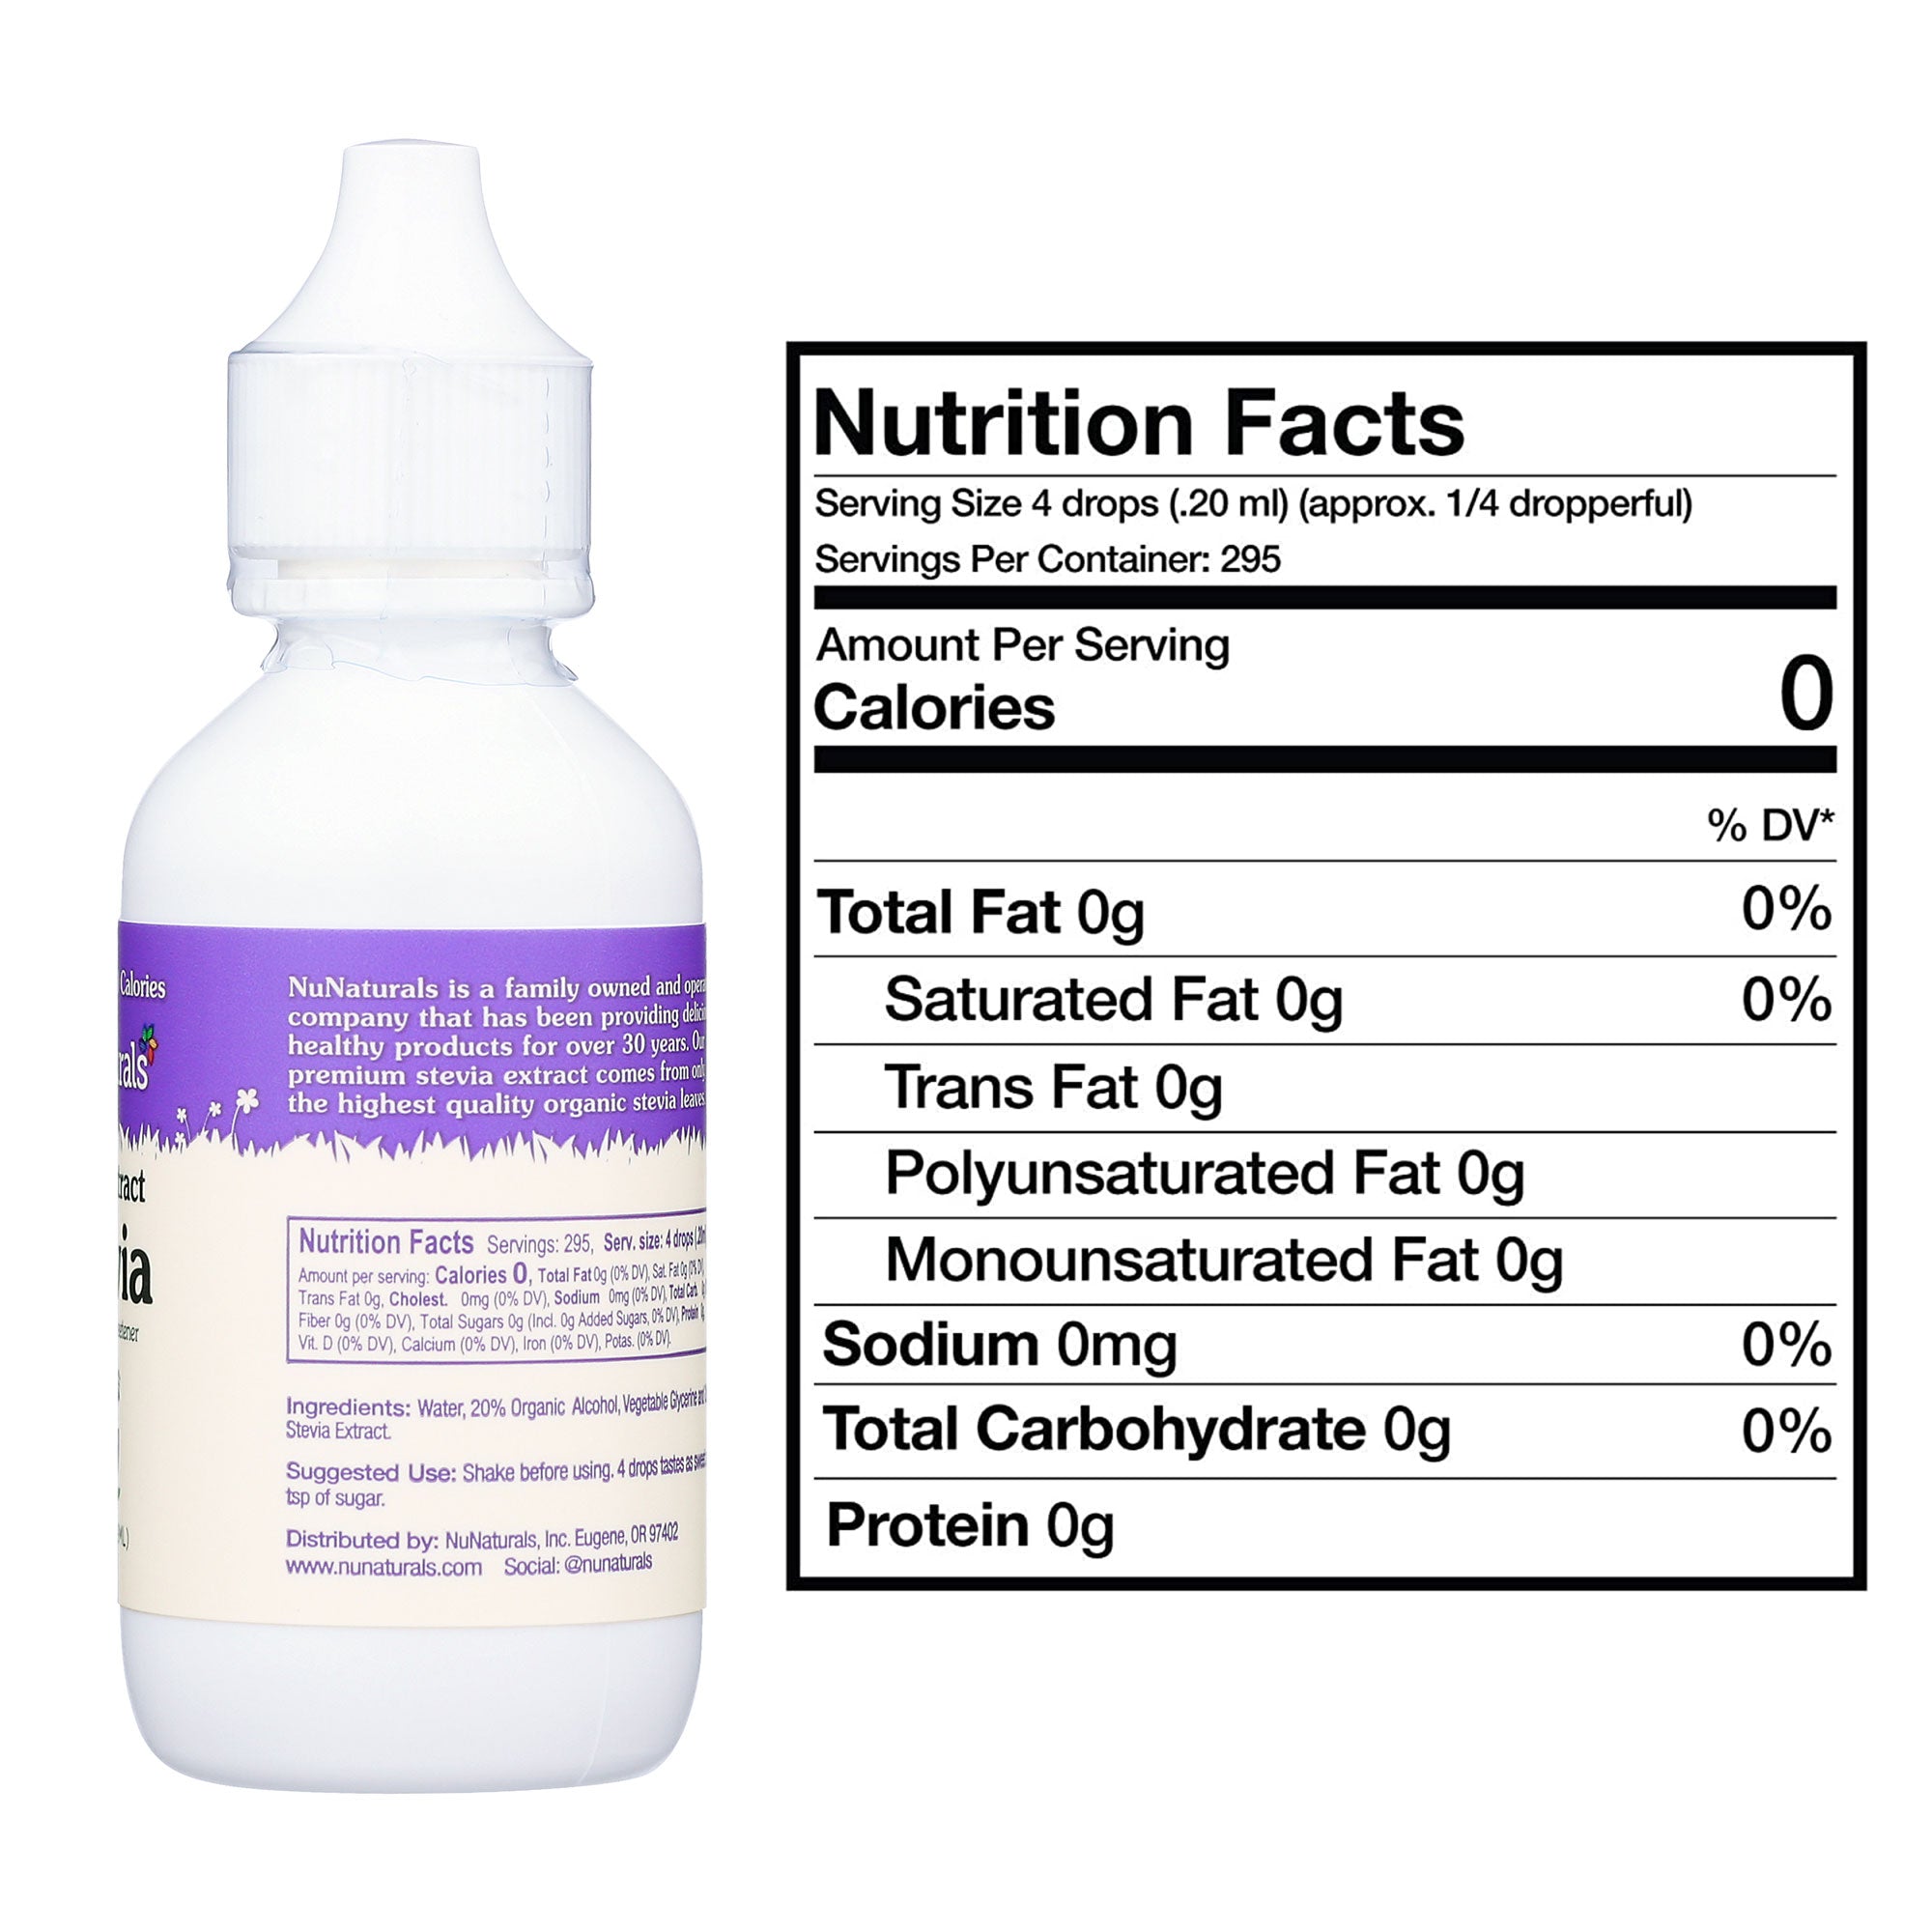 NuNaturals Clear Extract Stevia Plastic Bottle Nutrition Facts